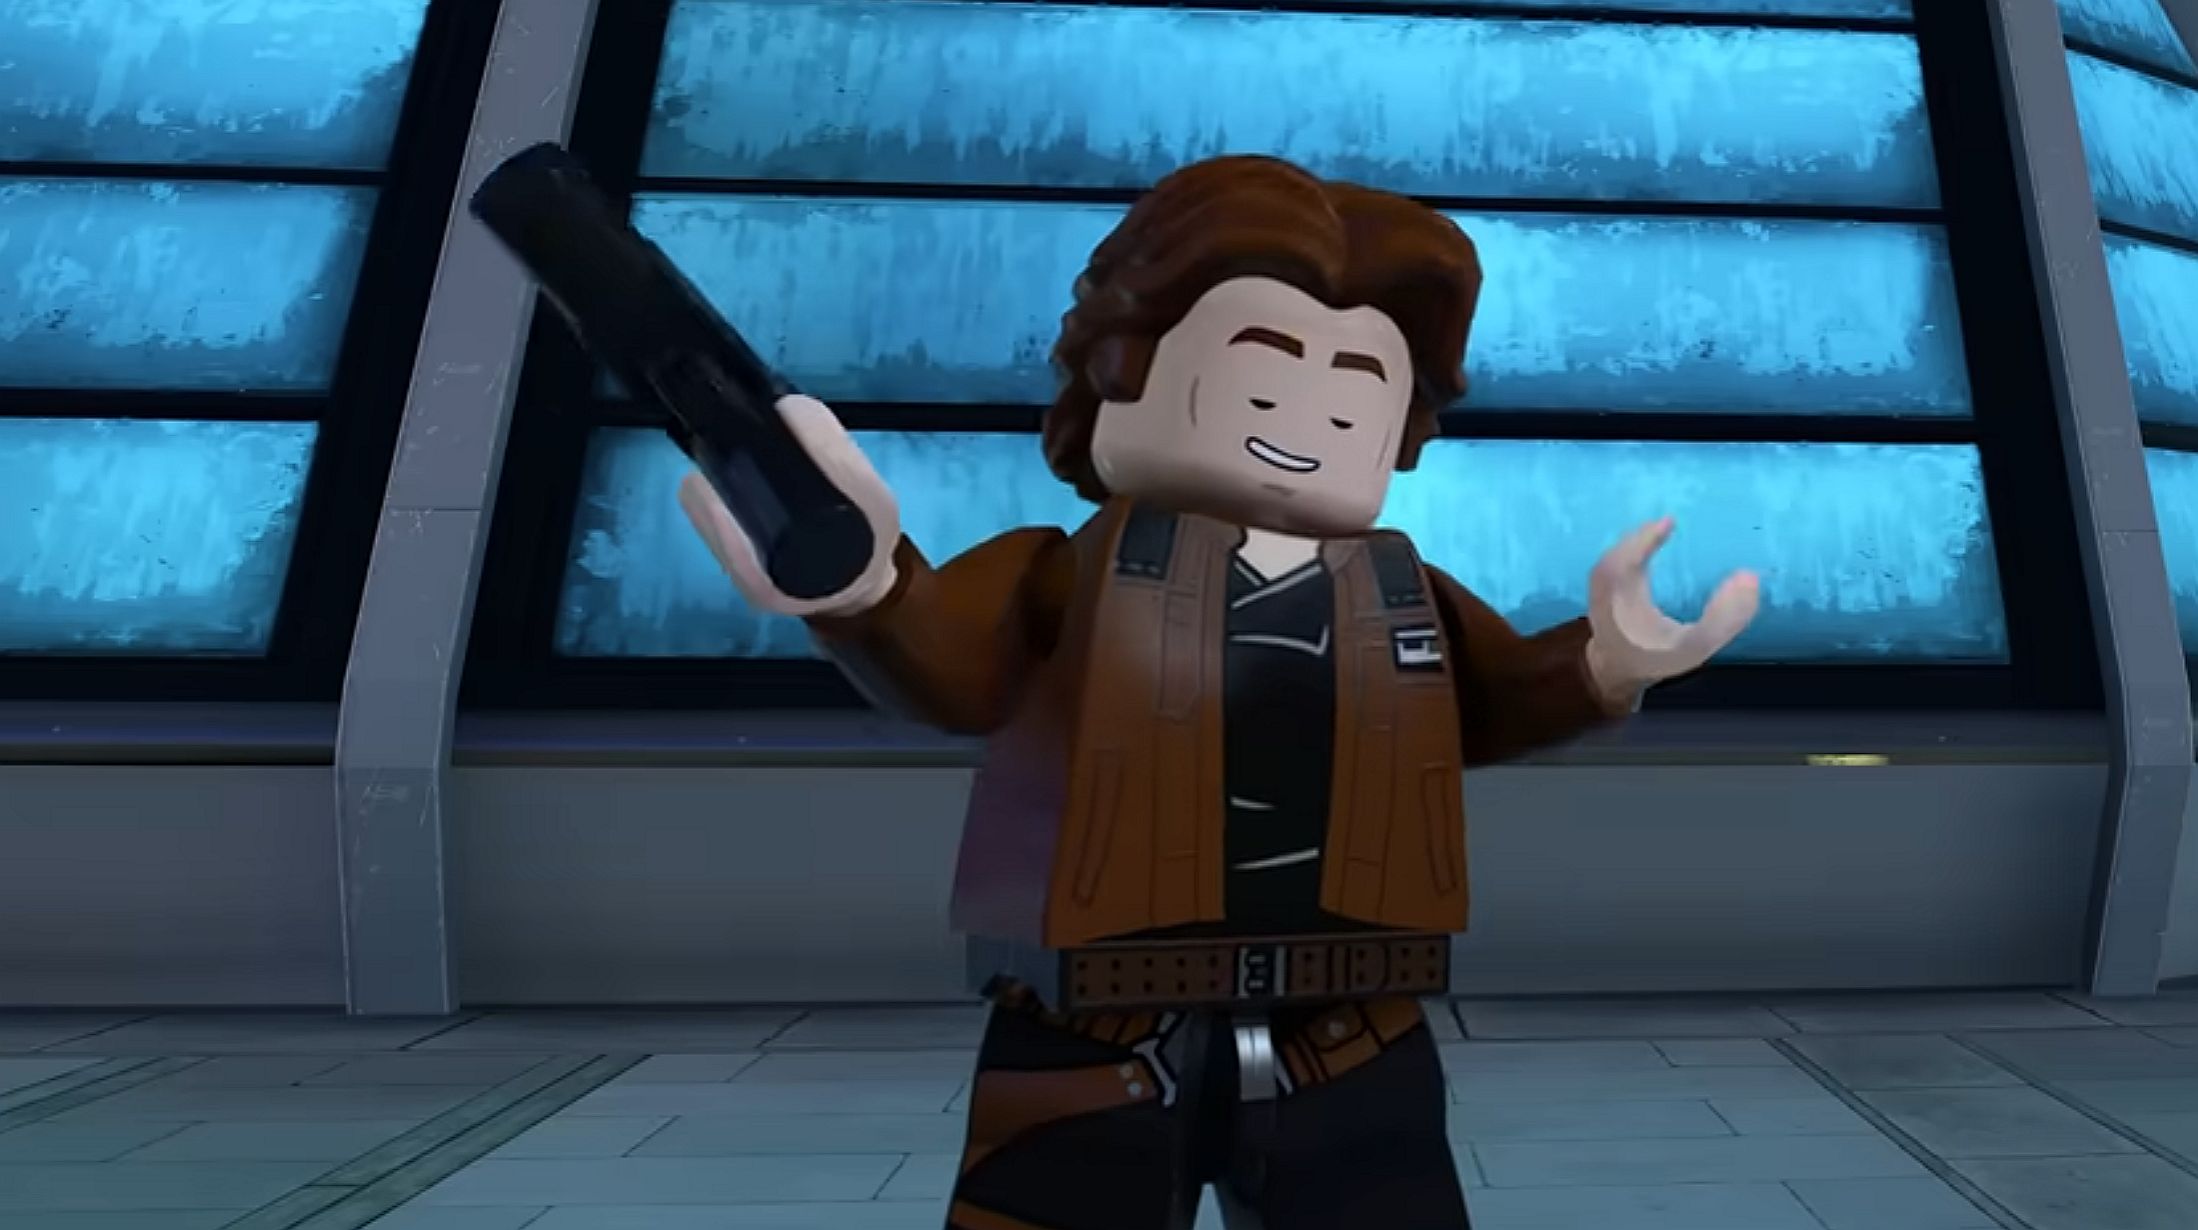 Image for LEGO Star Wars: The Skywalker Saga and Switch were best-sellers in April - NPD